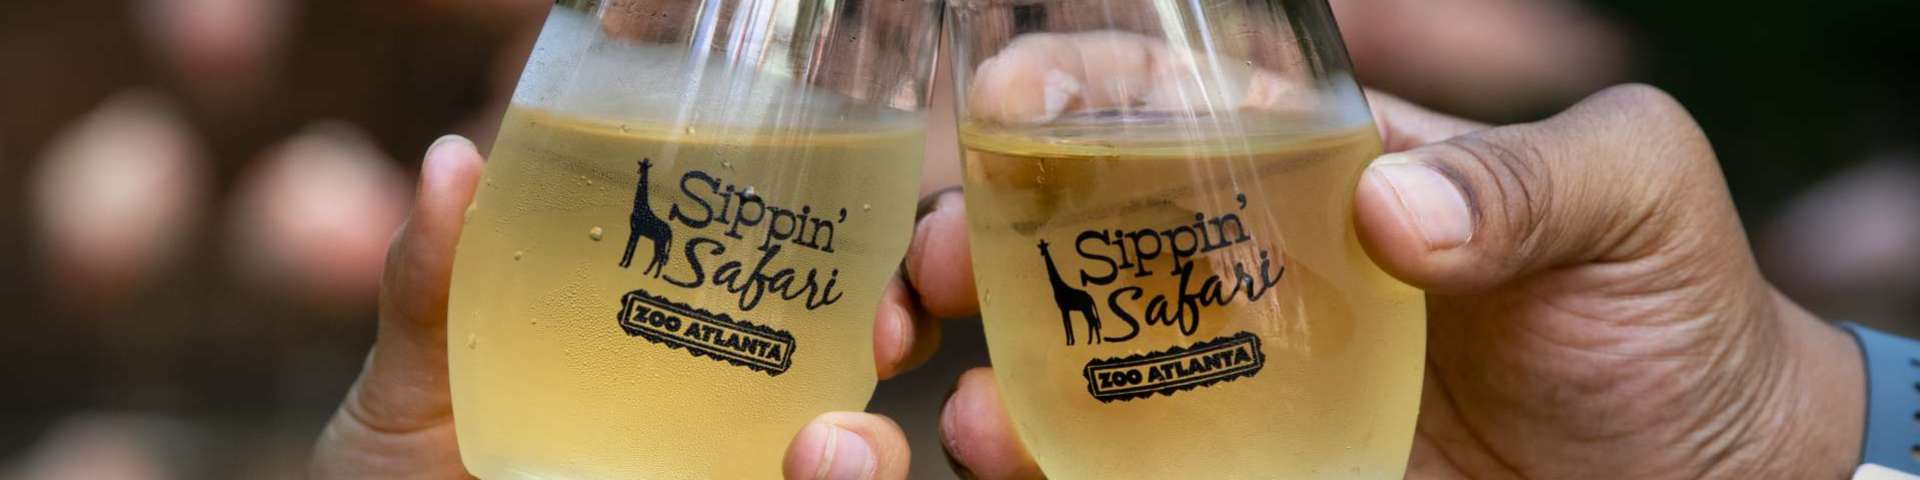 A toast with two wine glasses that have the Sippin' Safari logo on them.